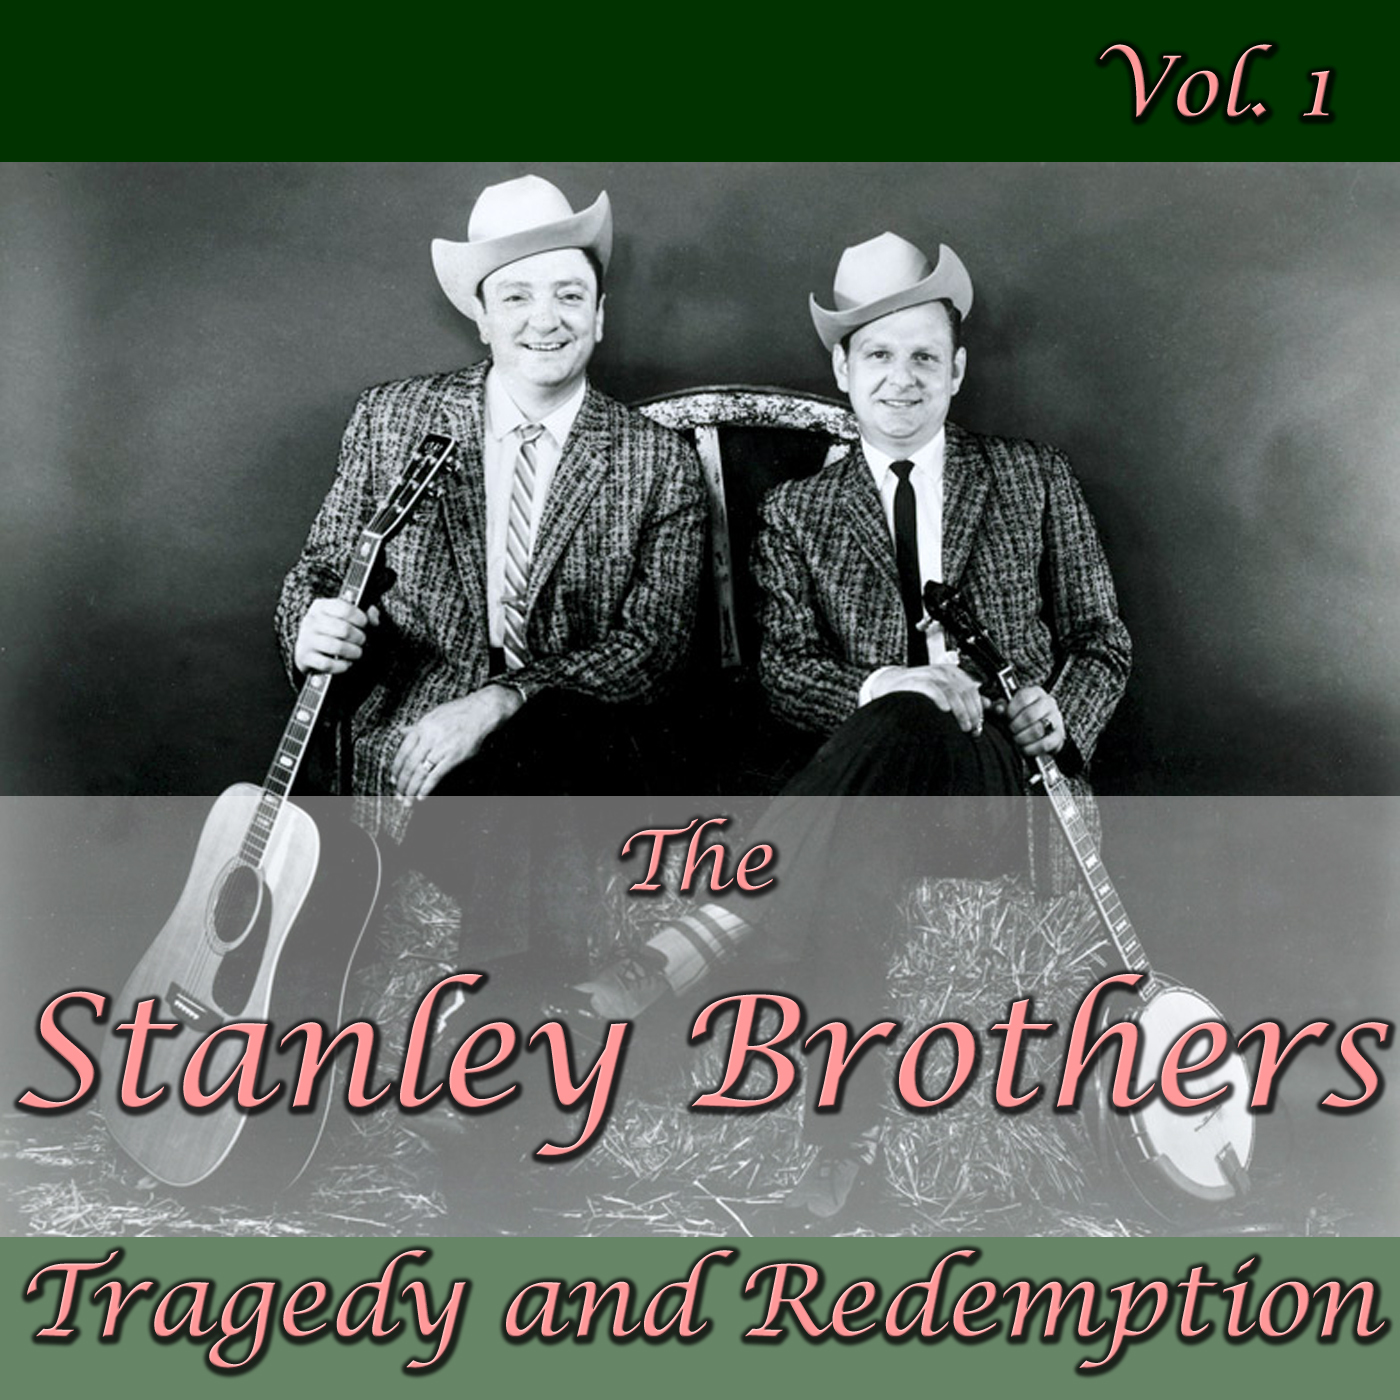 The Stanley Brothers: Tragedy and Redemption, Vol. 1